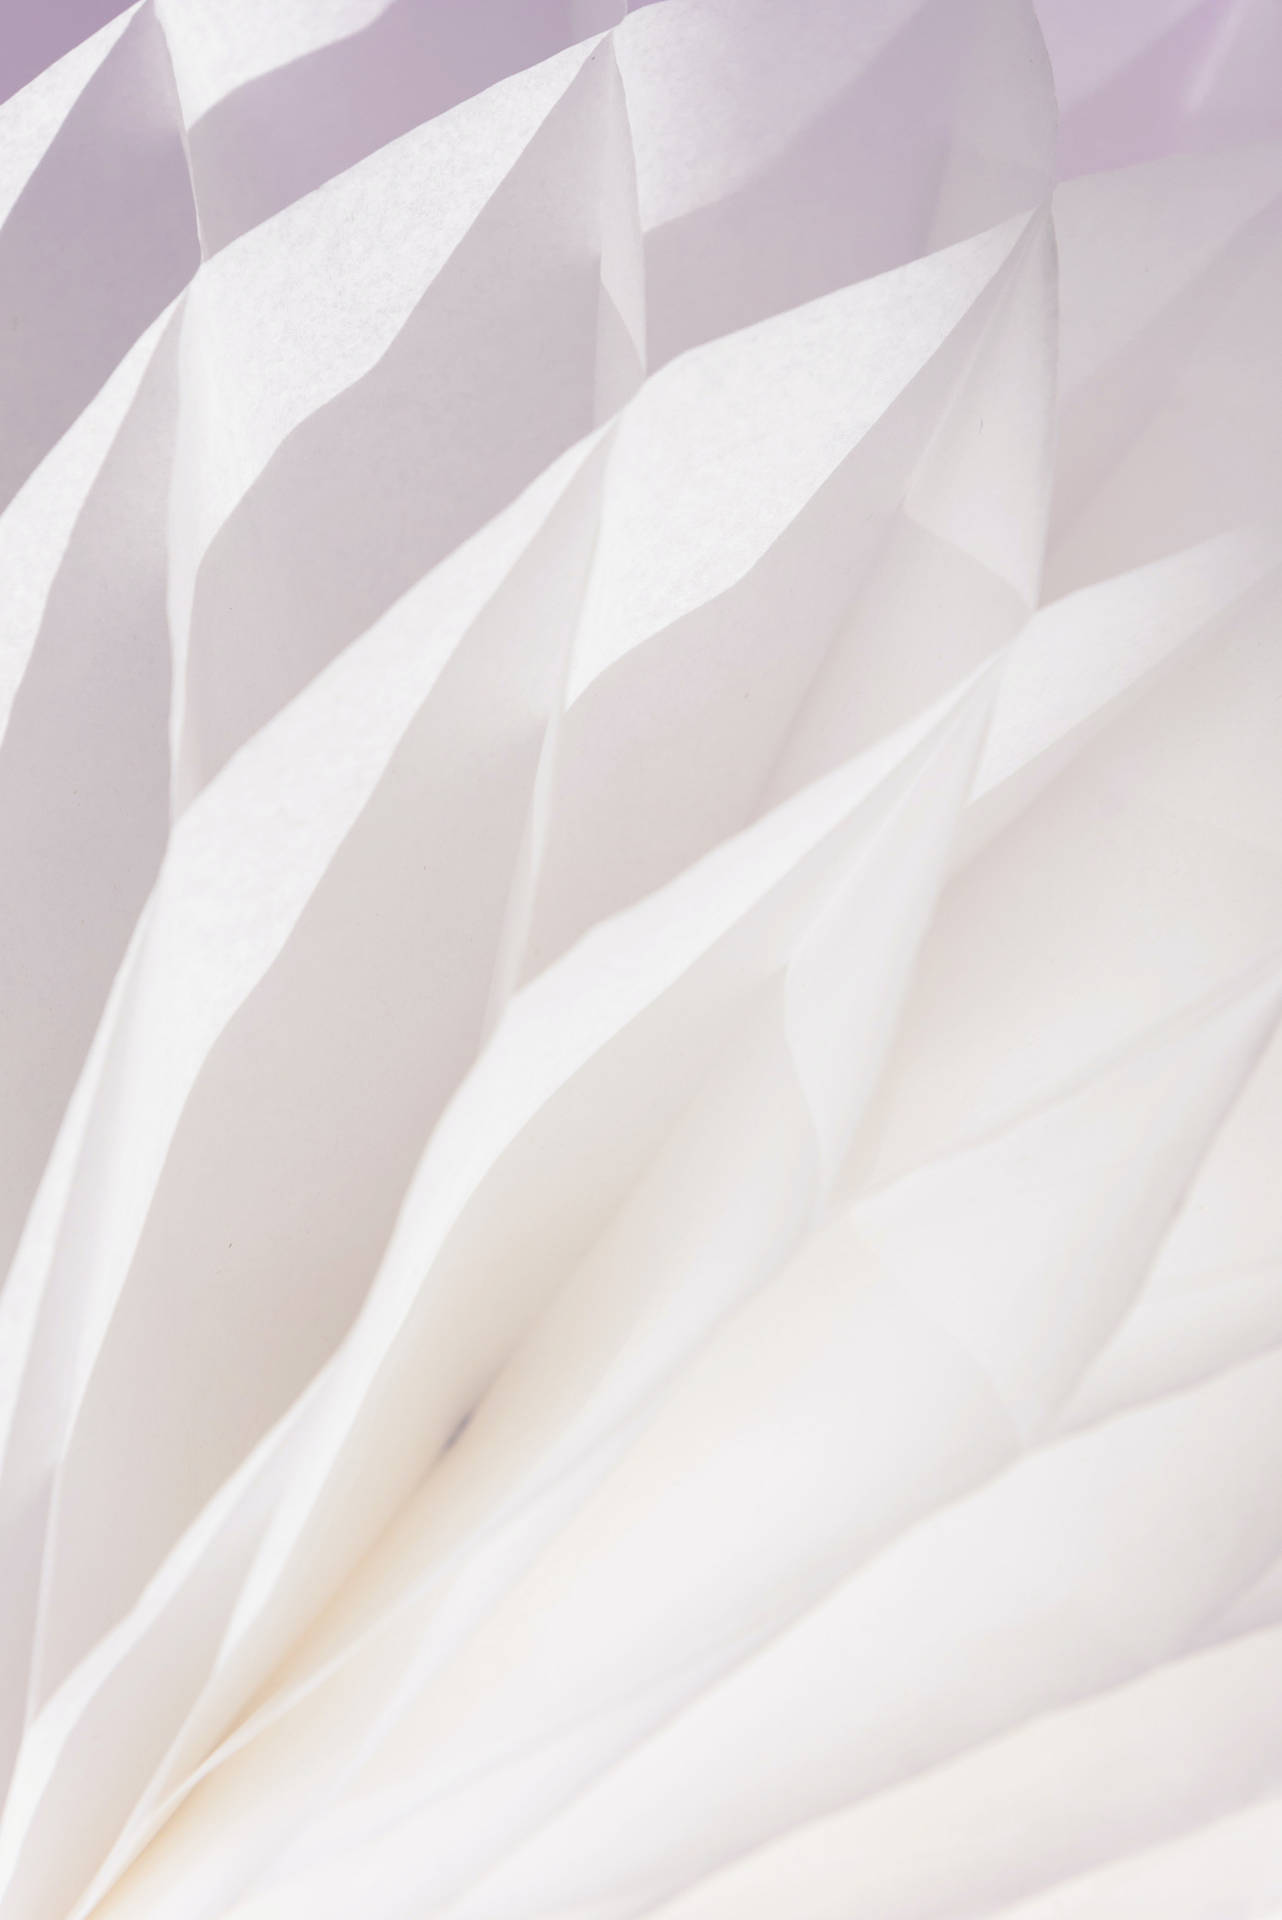 Pure White Abstract Flower Background